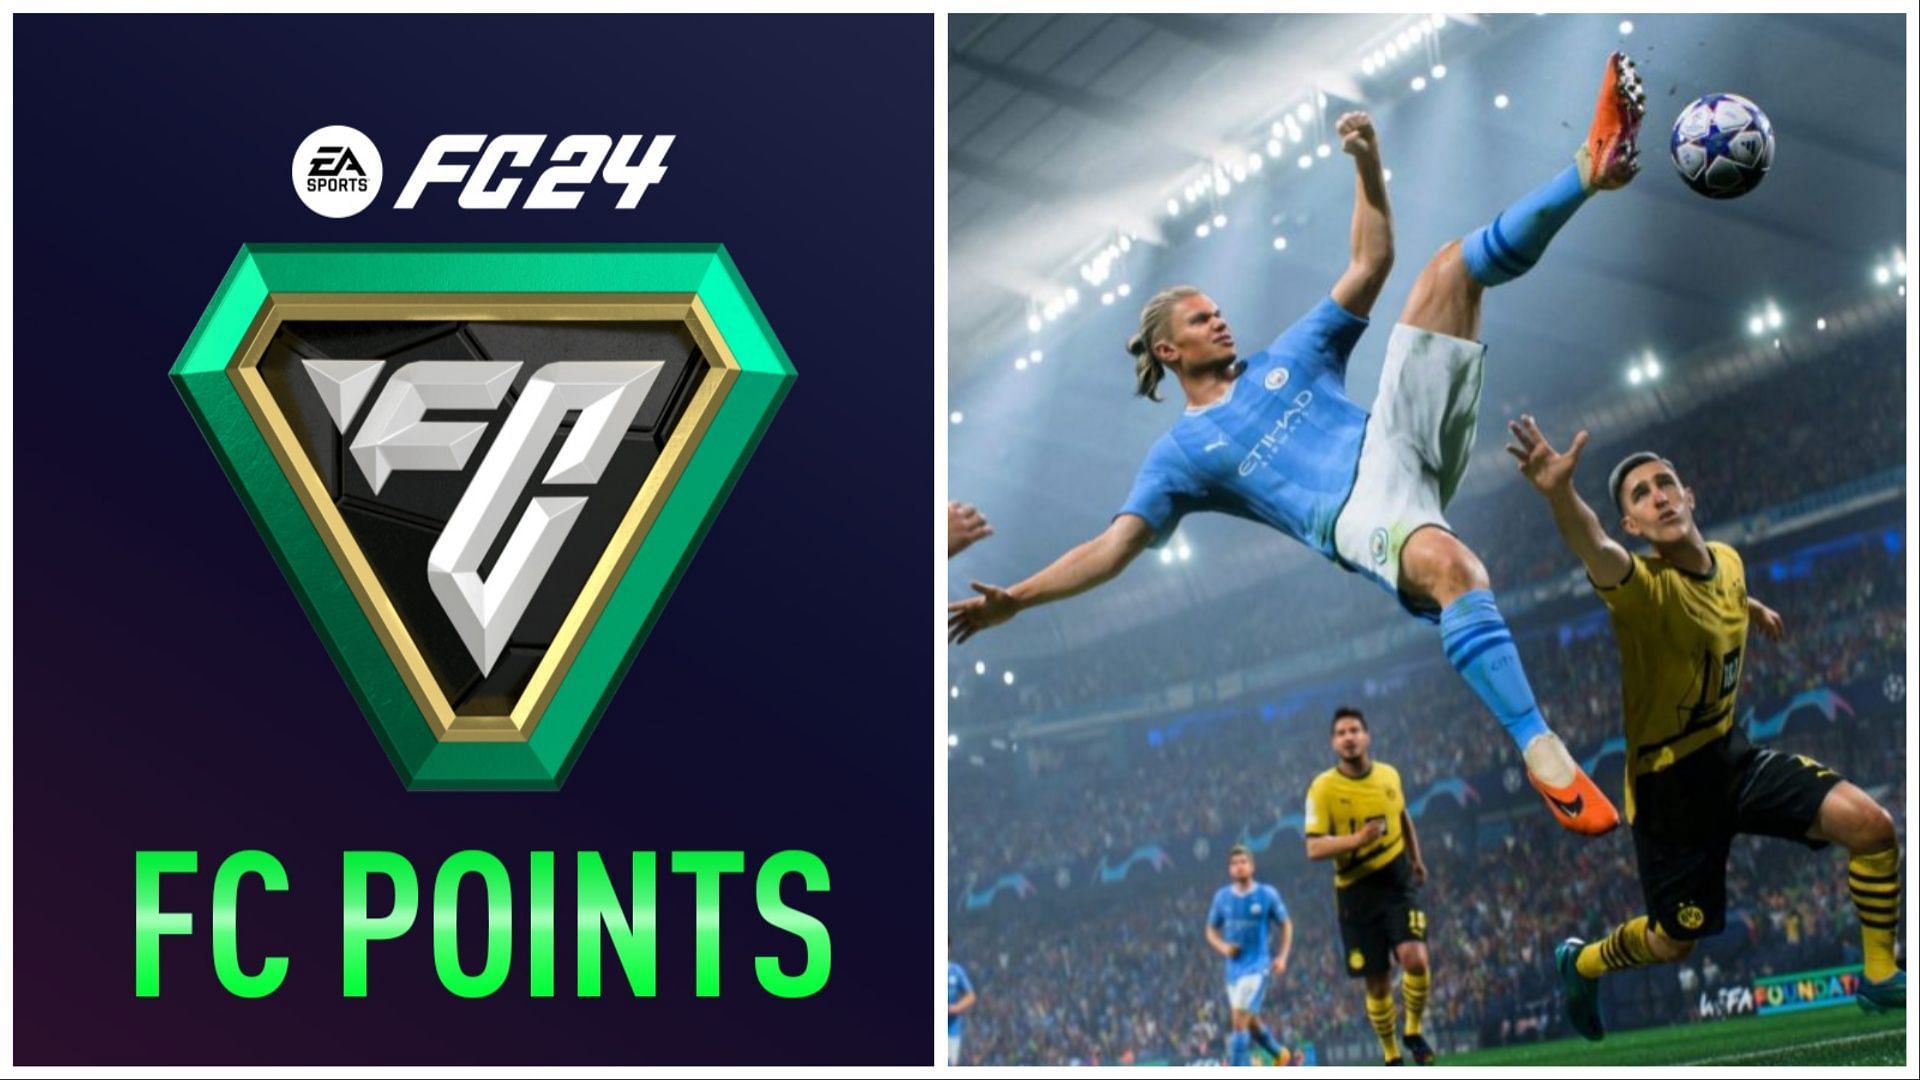 FC Points can be bought via the Web App (Images via EA Sports)